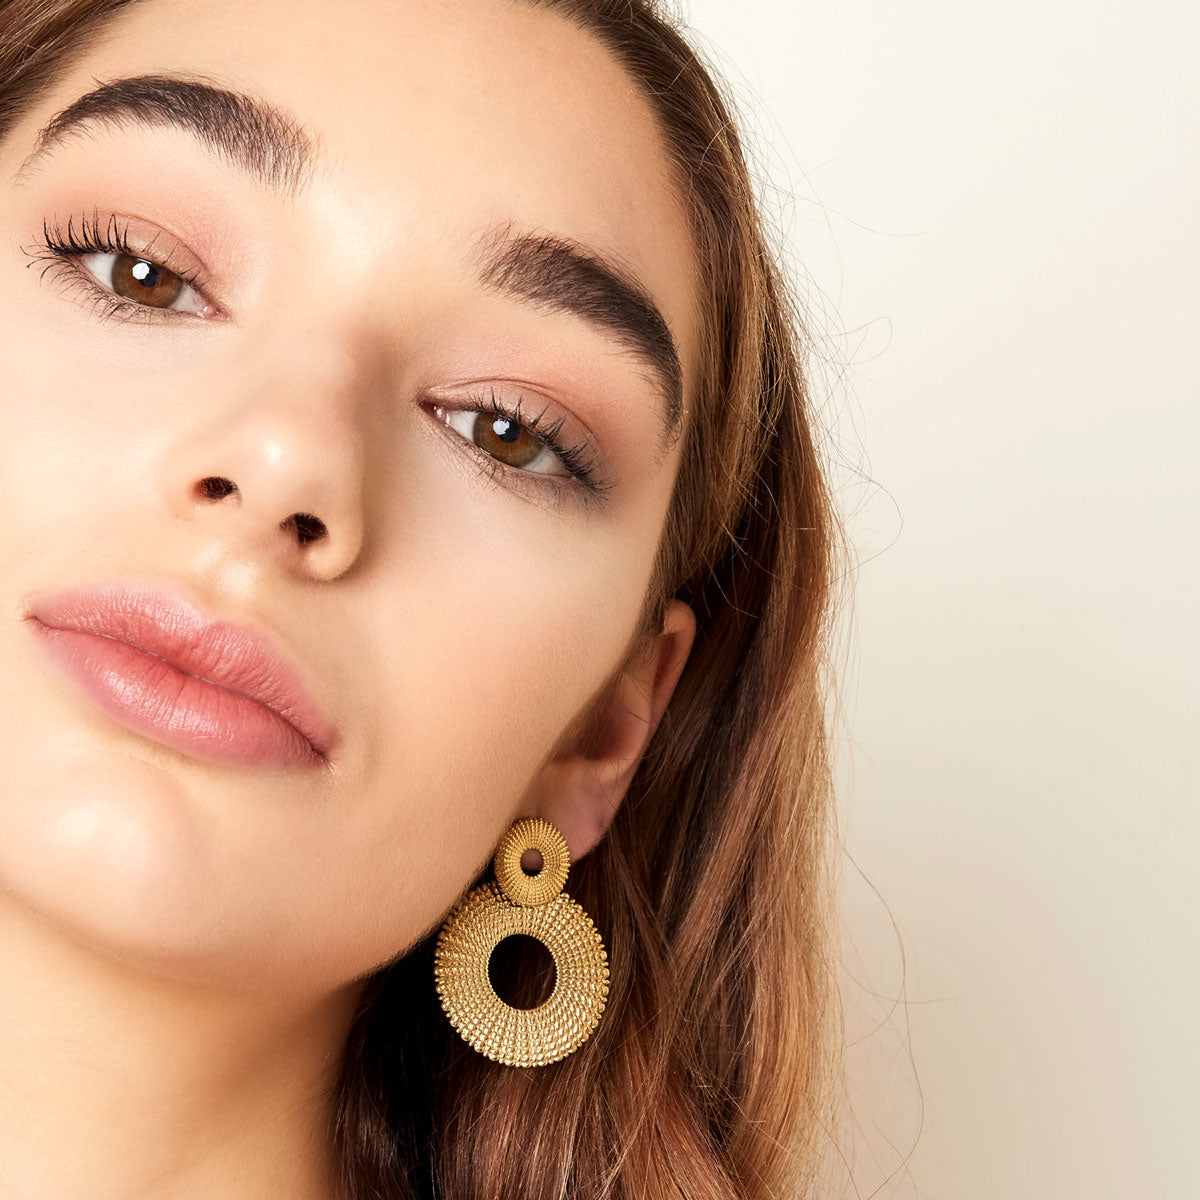 Statement earrings circles